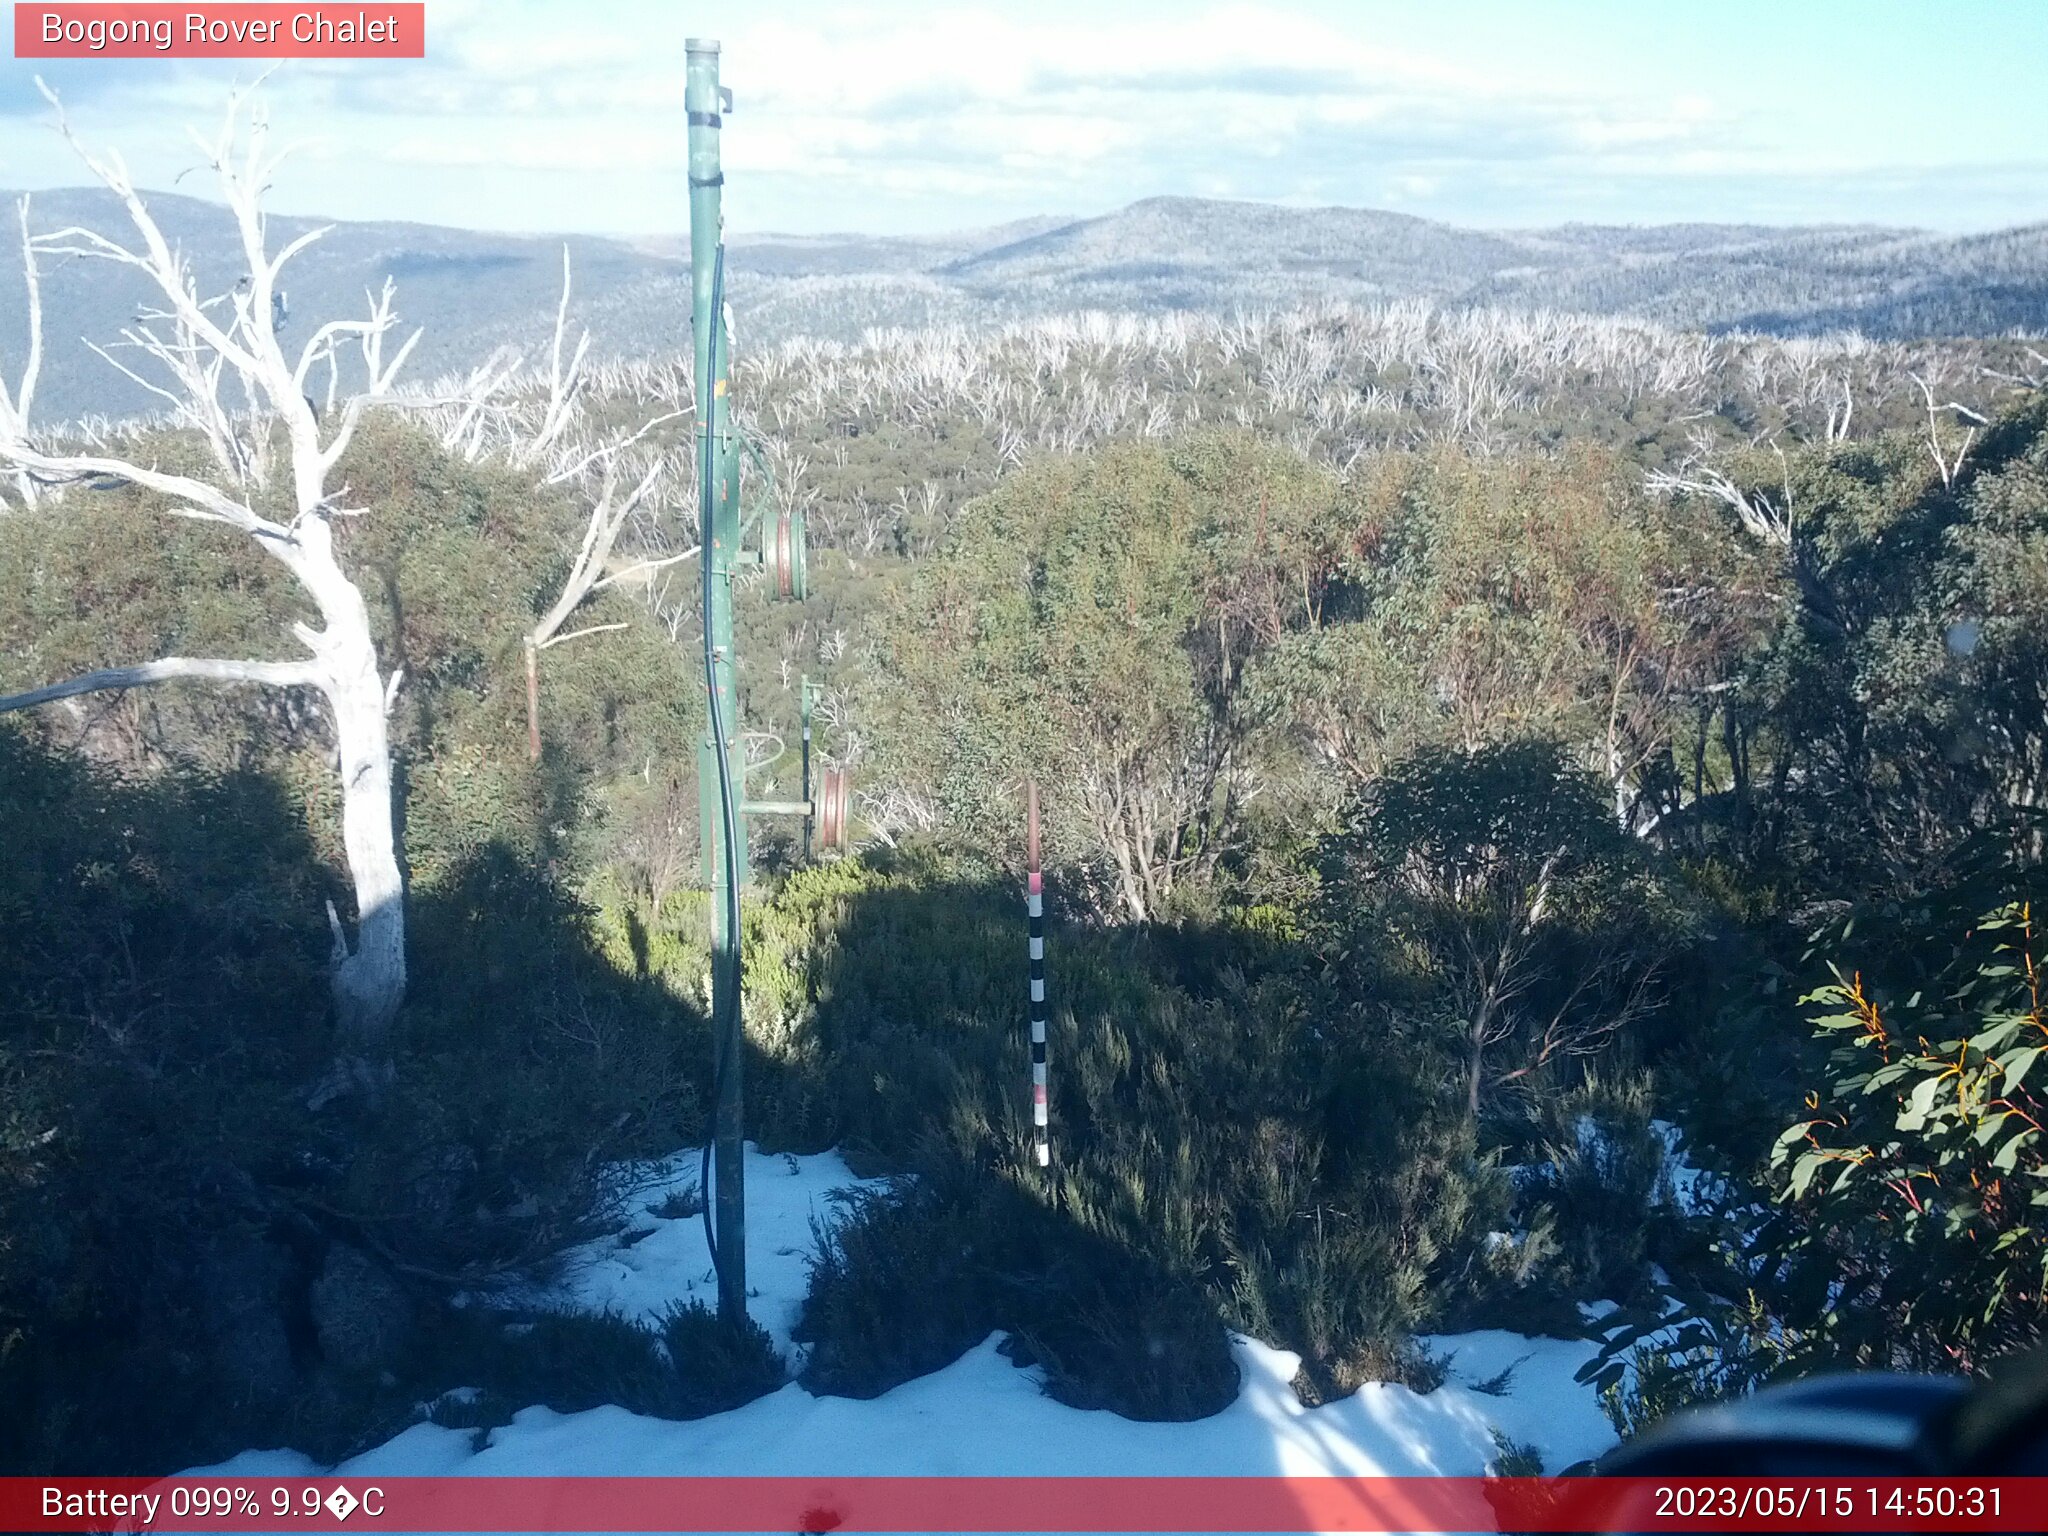 Bogong Web Cam 2:50pm Monday 15th of May 2023